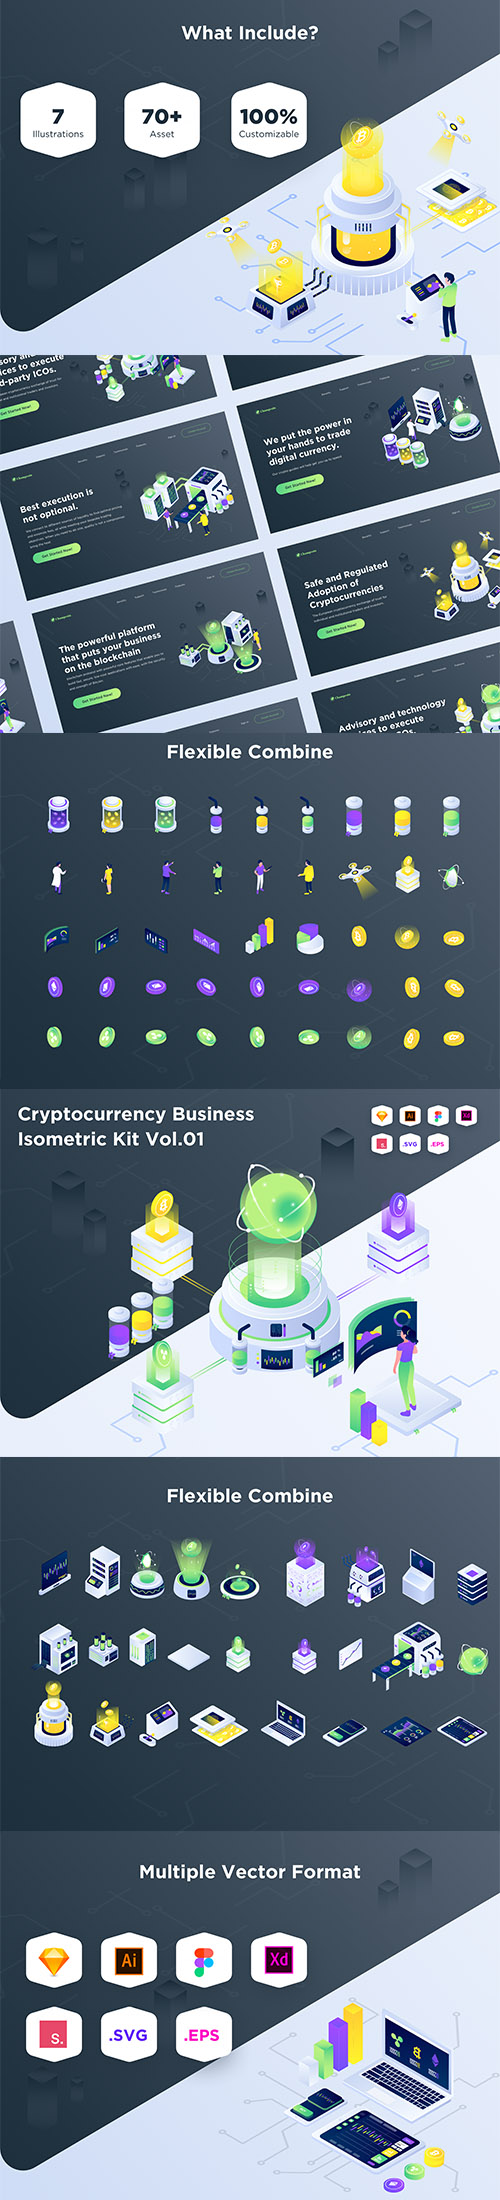 Cryptocurrency Business Isometric Vector Kit Vol.01